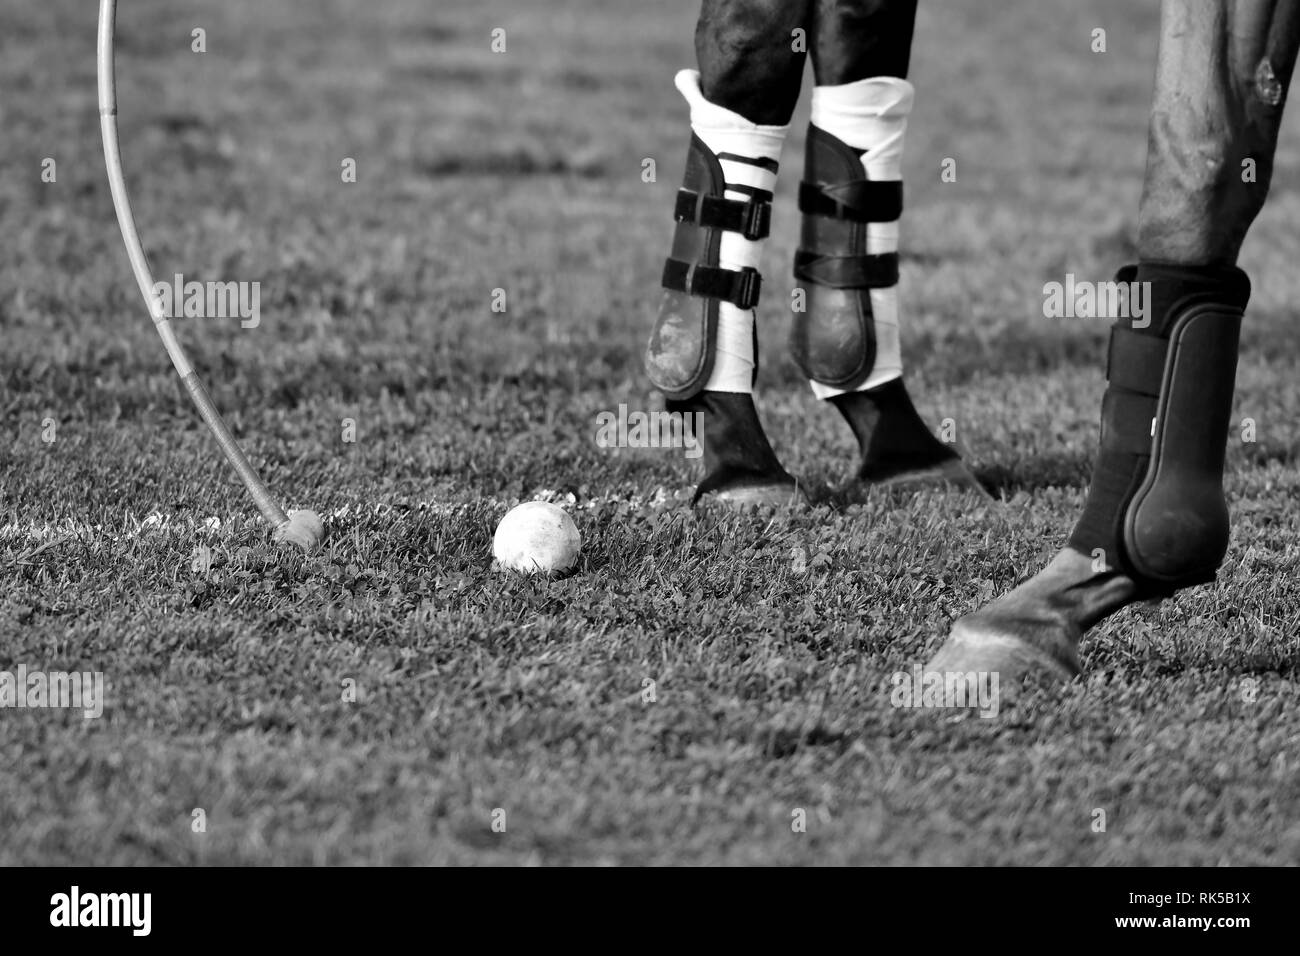 Polo horse legs close up. Ball and mallet on the grass. Horizontal, black and white. Stock Photo